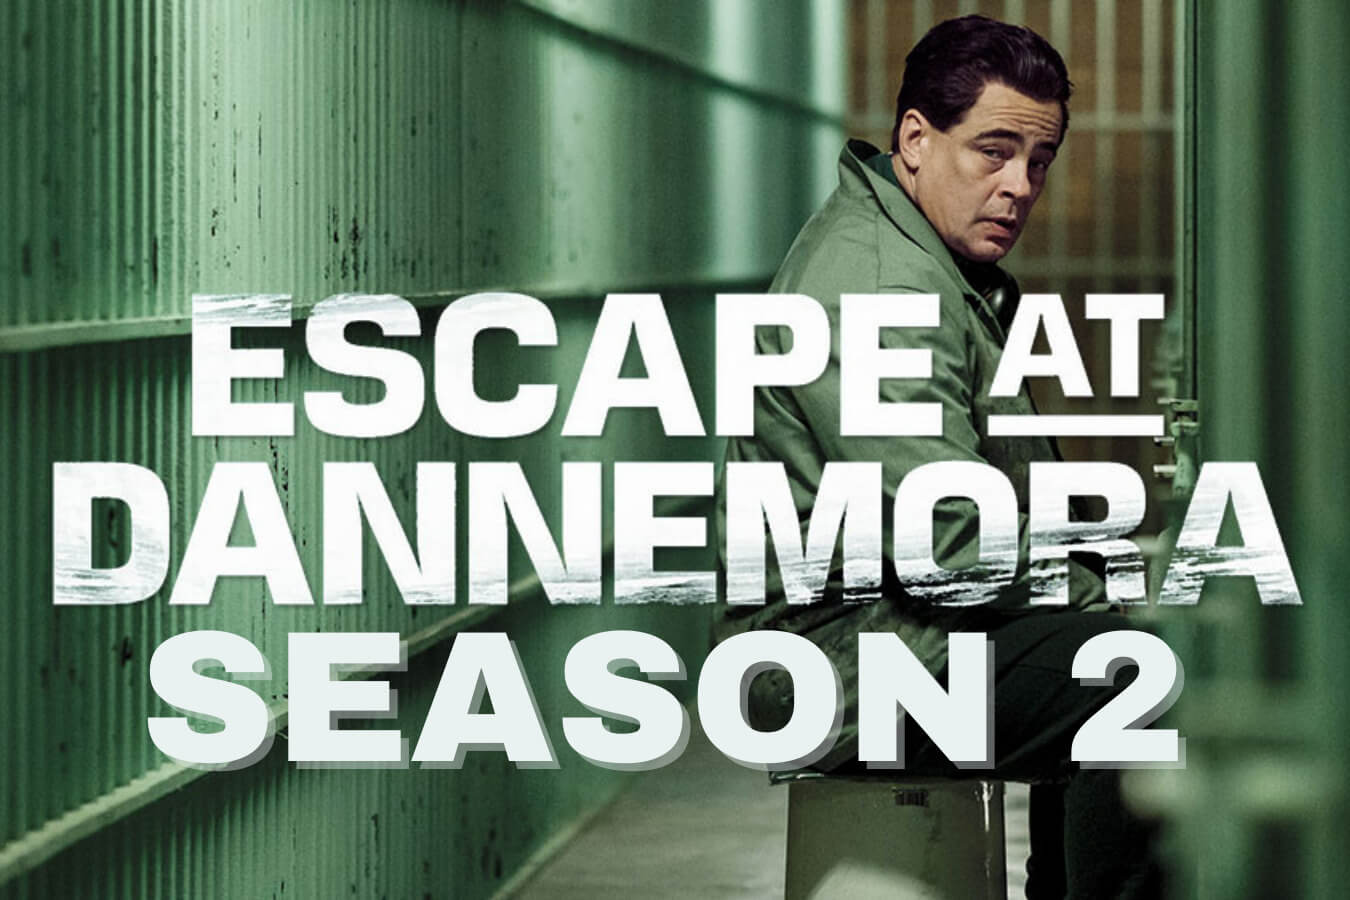 How many episodes are in the previous season of Escape at Dannemora?